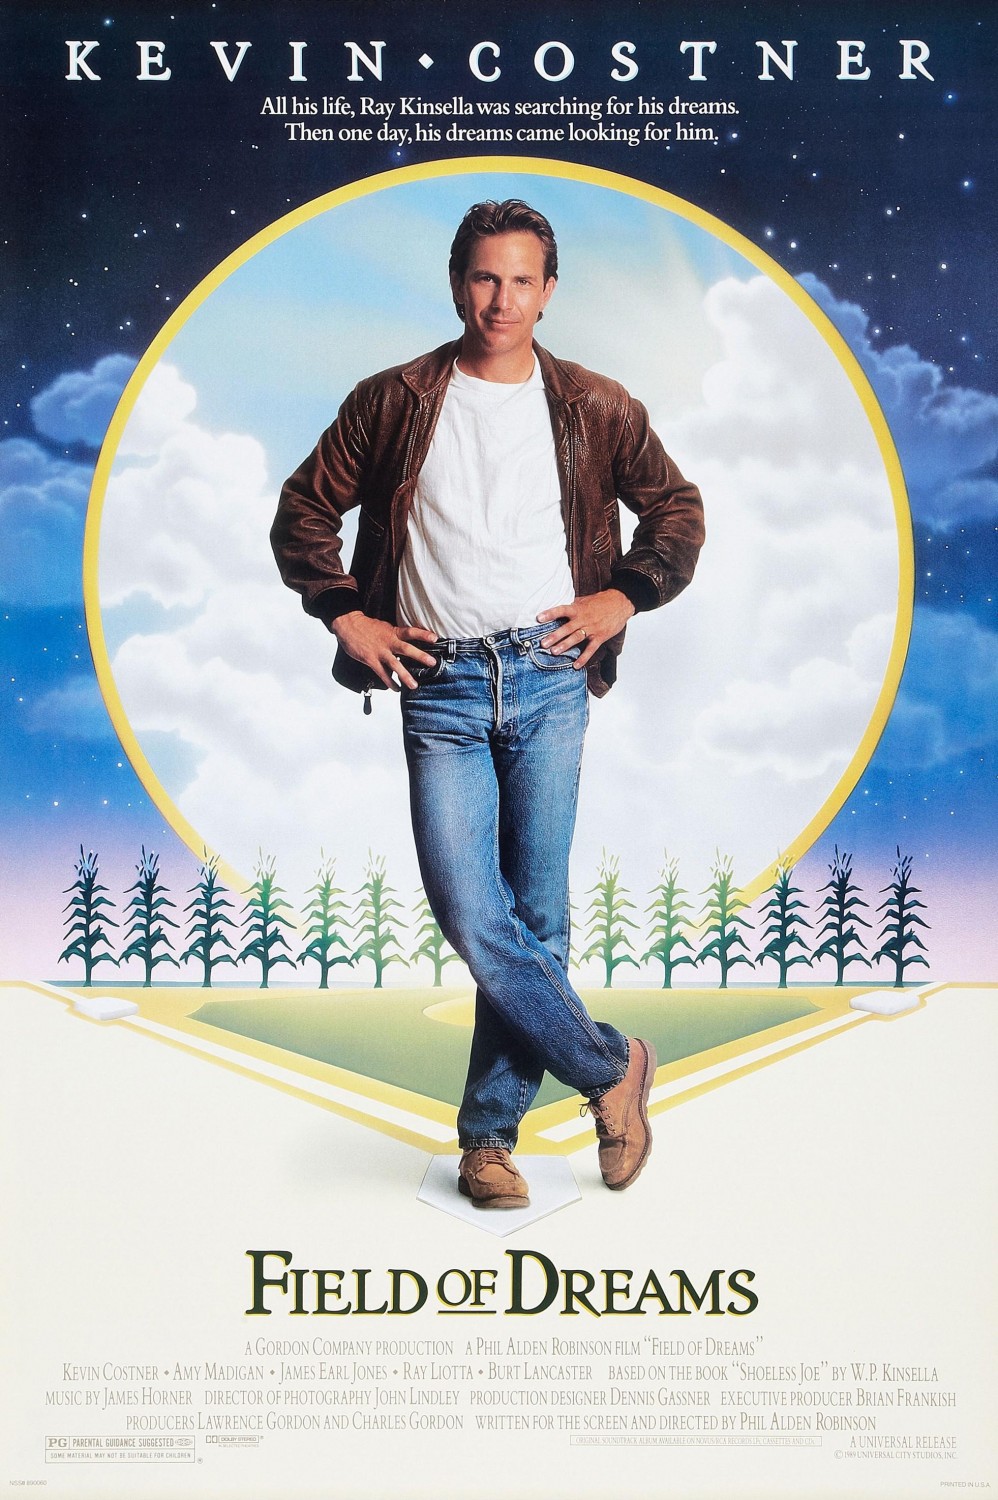 Movies You Gotta See: ‘Field of Dreams’ and the magic of baseball